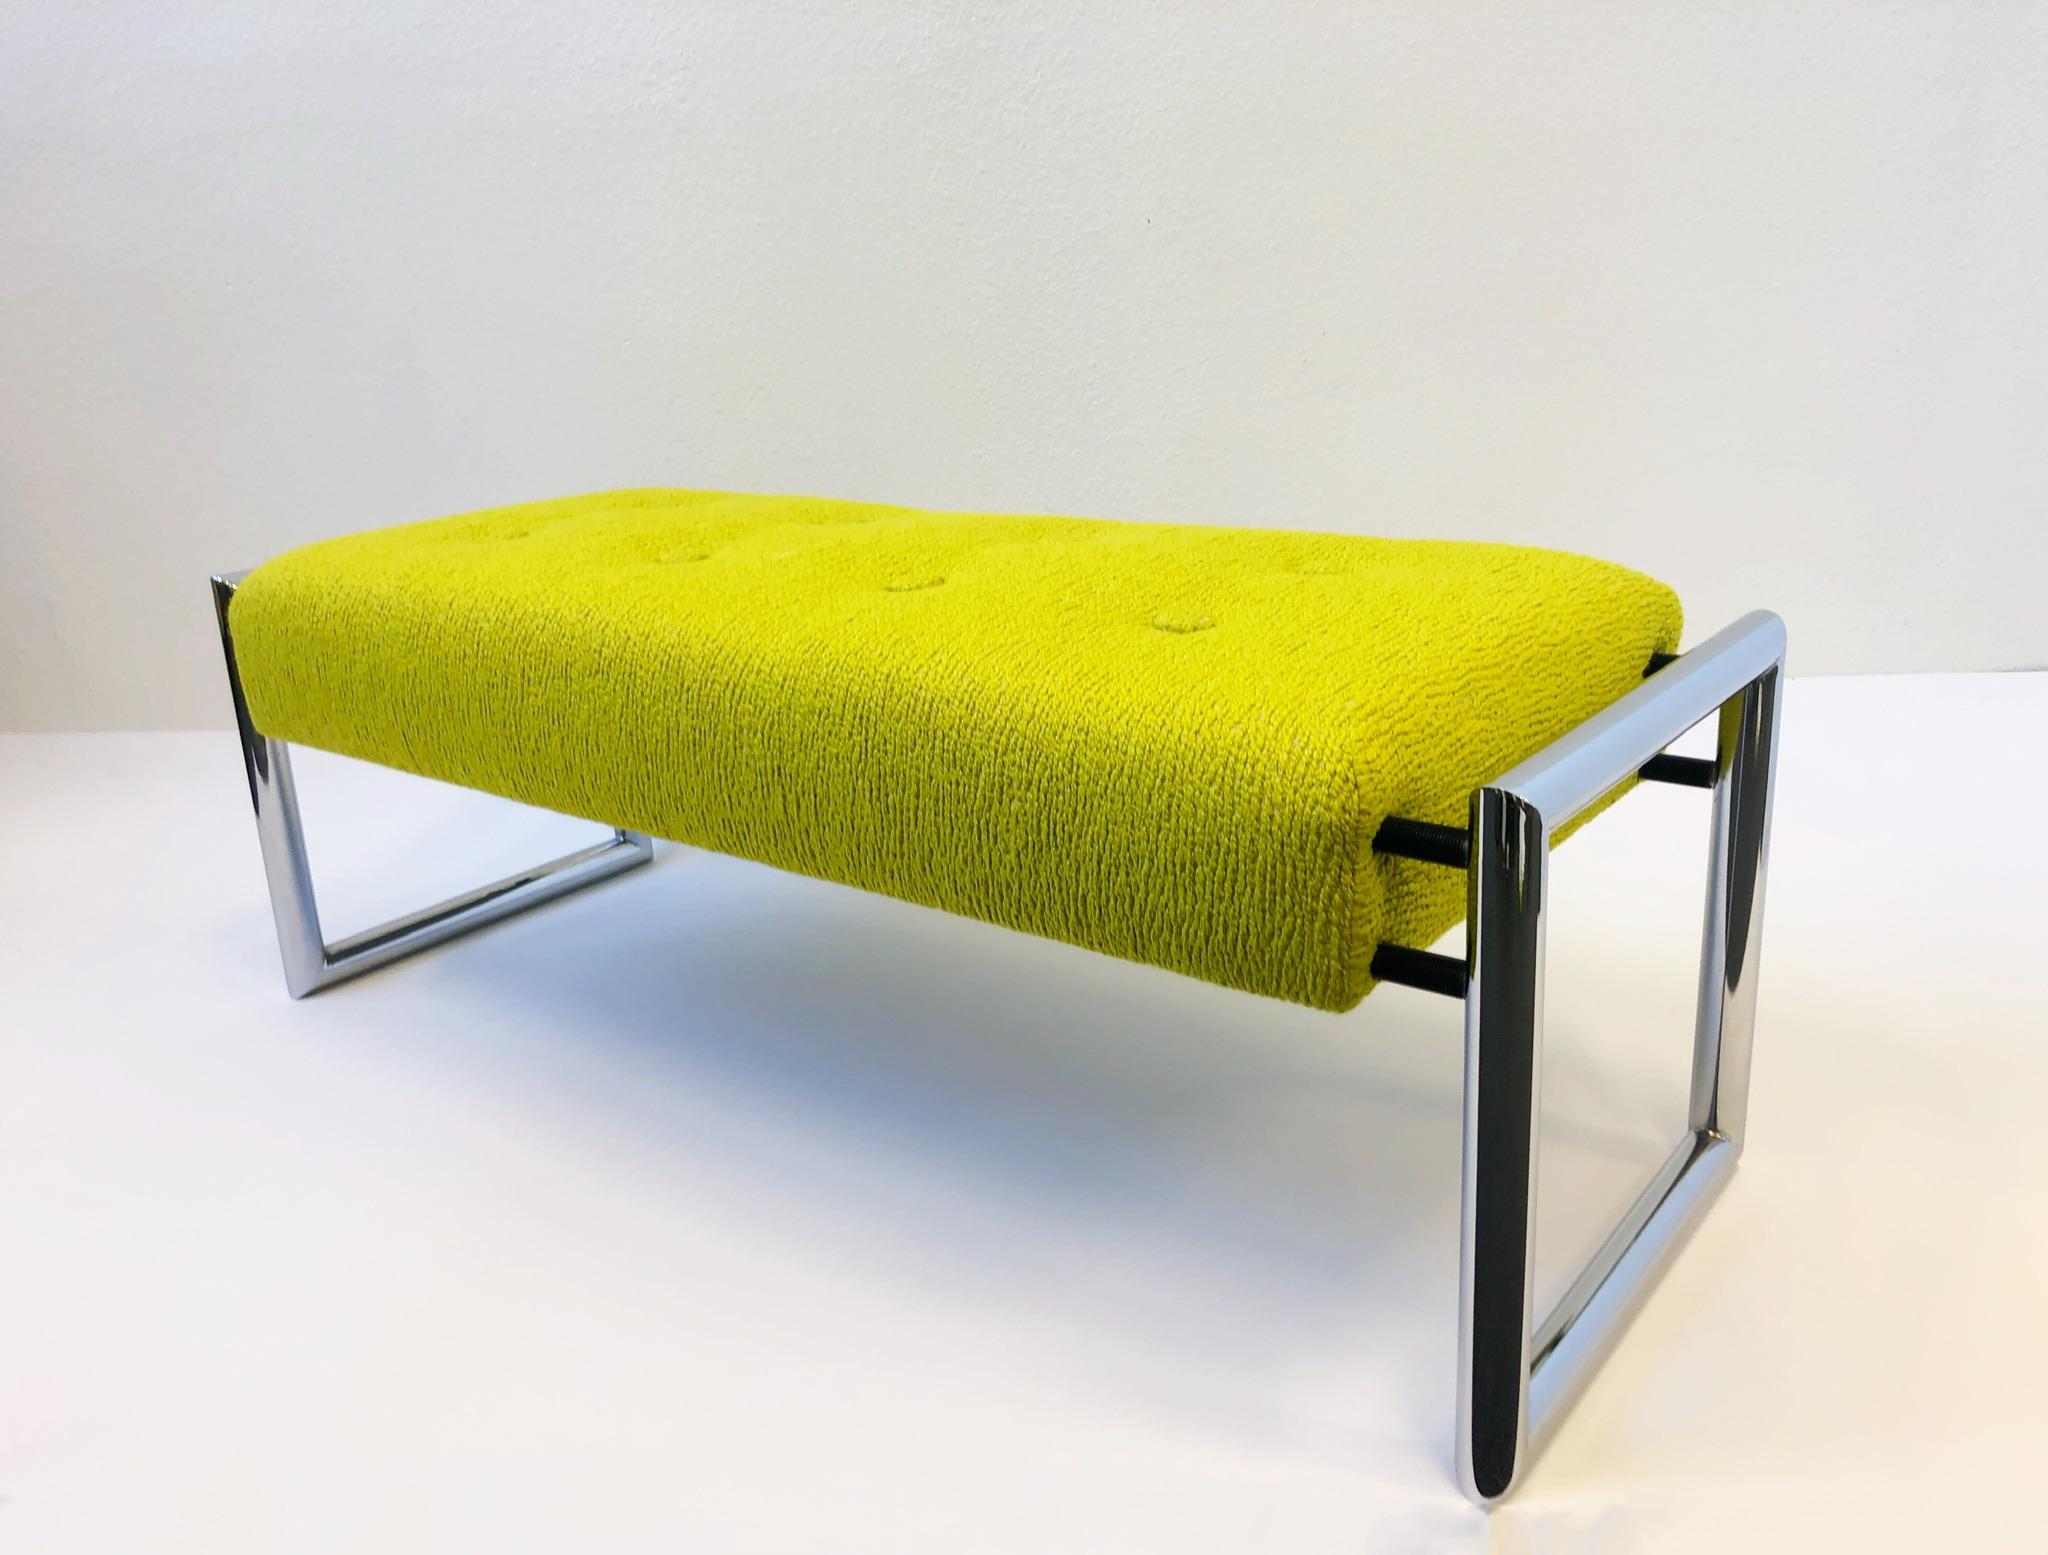 A glamorous polish chrome and chartreuse bench from the 1960s. The bench has been newly recovered in a beautiful chartreuse nubby fabric. The chrome shows minor wear.
Dimension: 17” high, 19” deep, 49” wide.